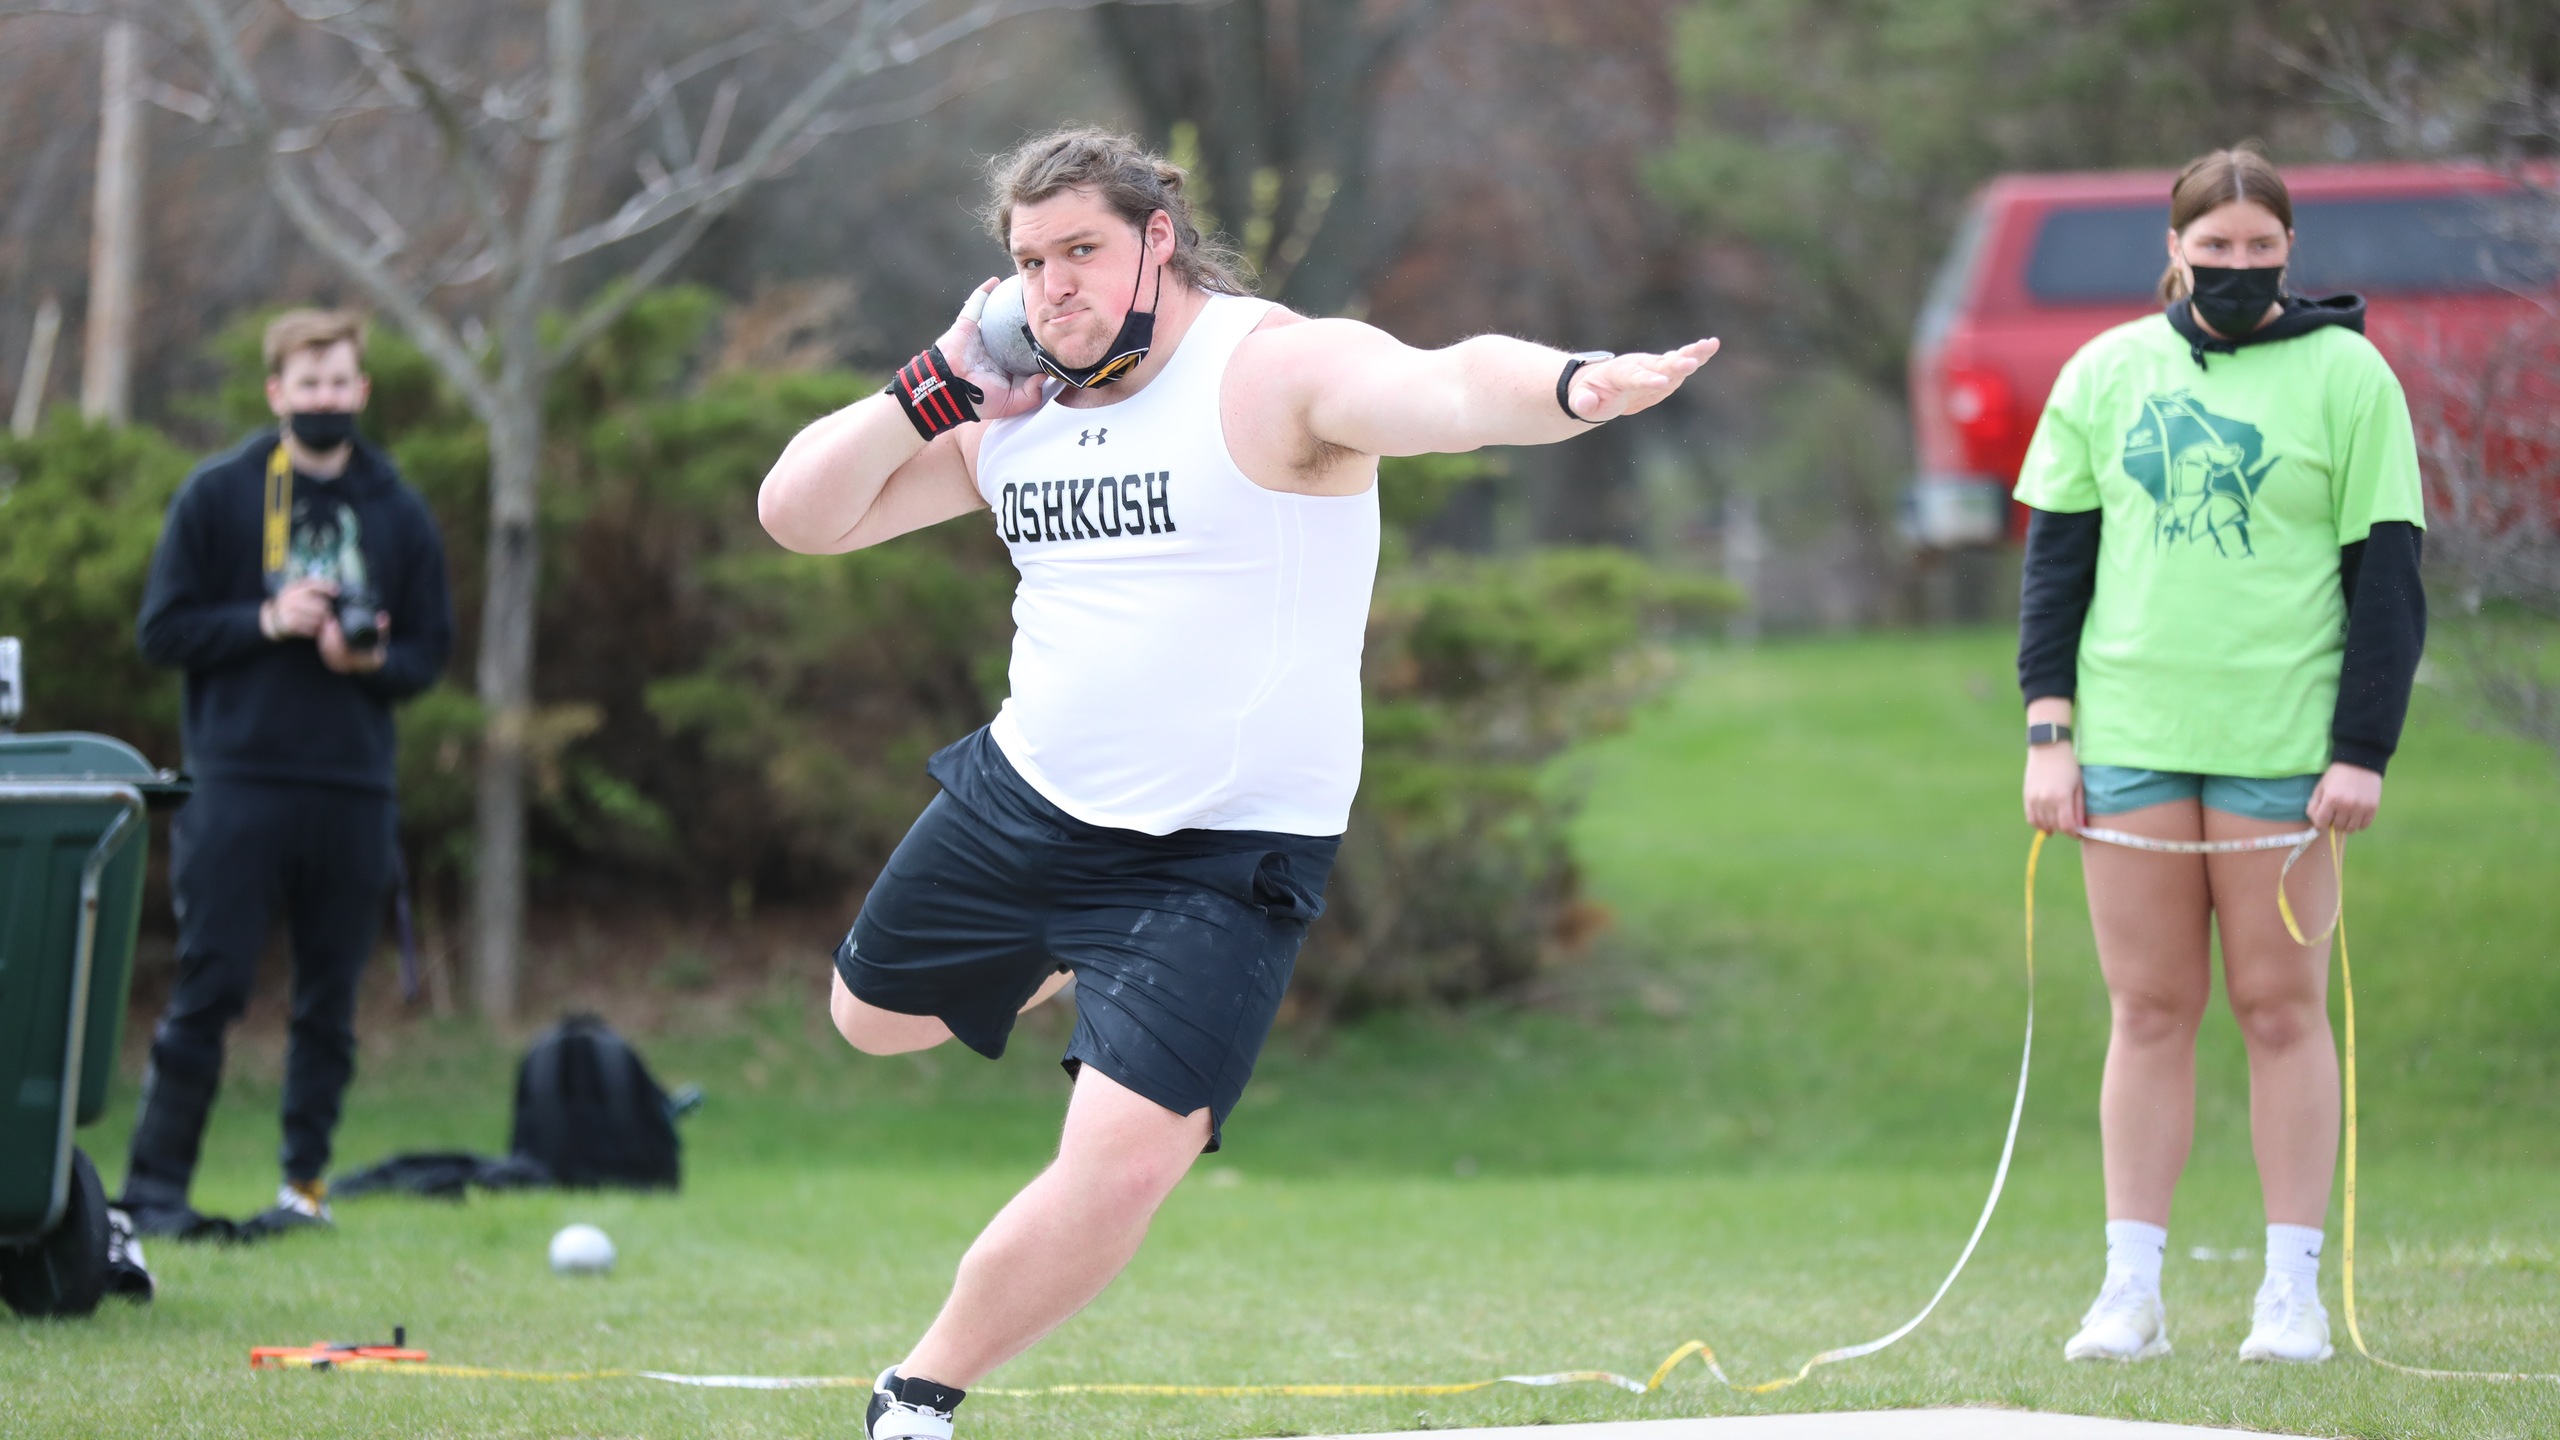 Nick Tegtmeier won the shot put at the UW-Platteville Border Battle with a throw of 53-1 1/2 that ranks 12th nationally.